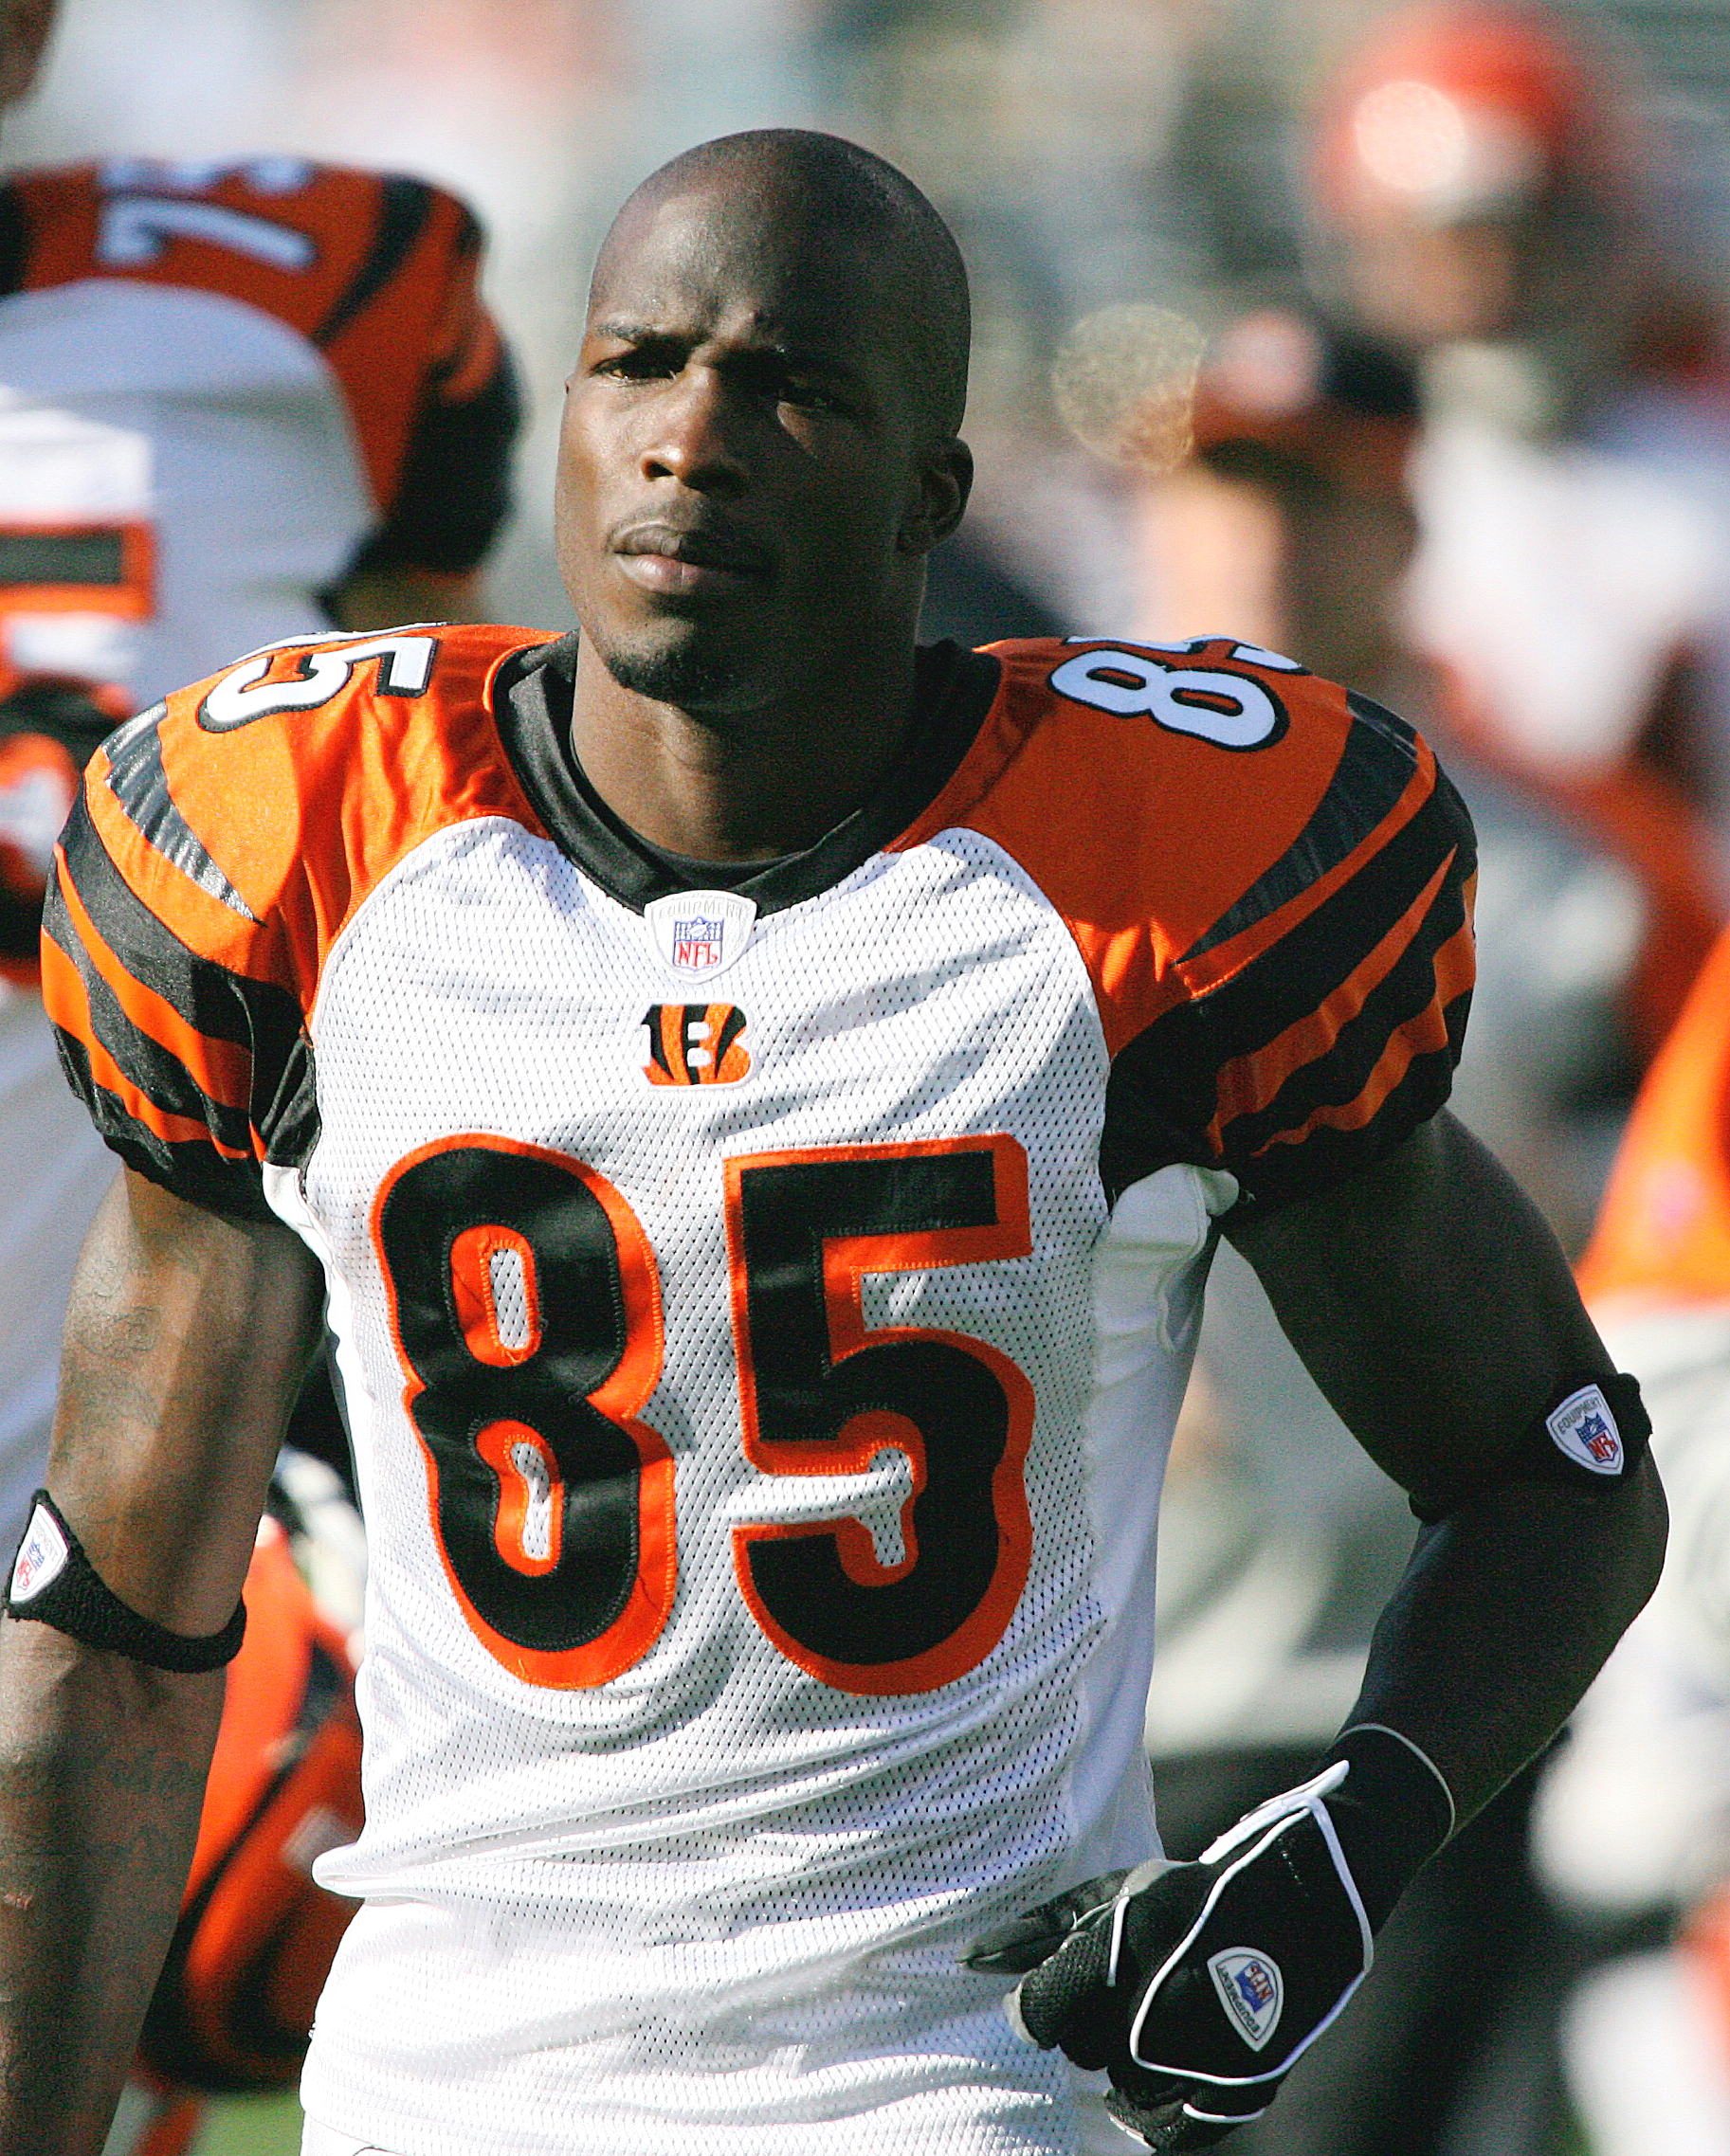 Is Former NFL Player Chad Ochocinco And Sharelle Rosado Dating? Details About His Family And Kids